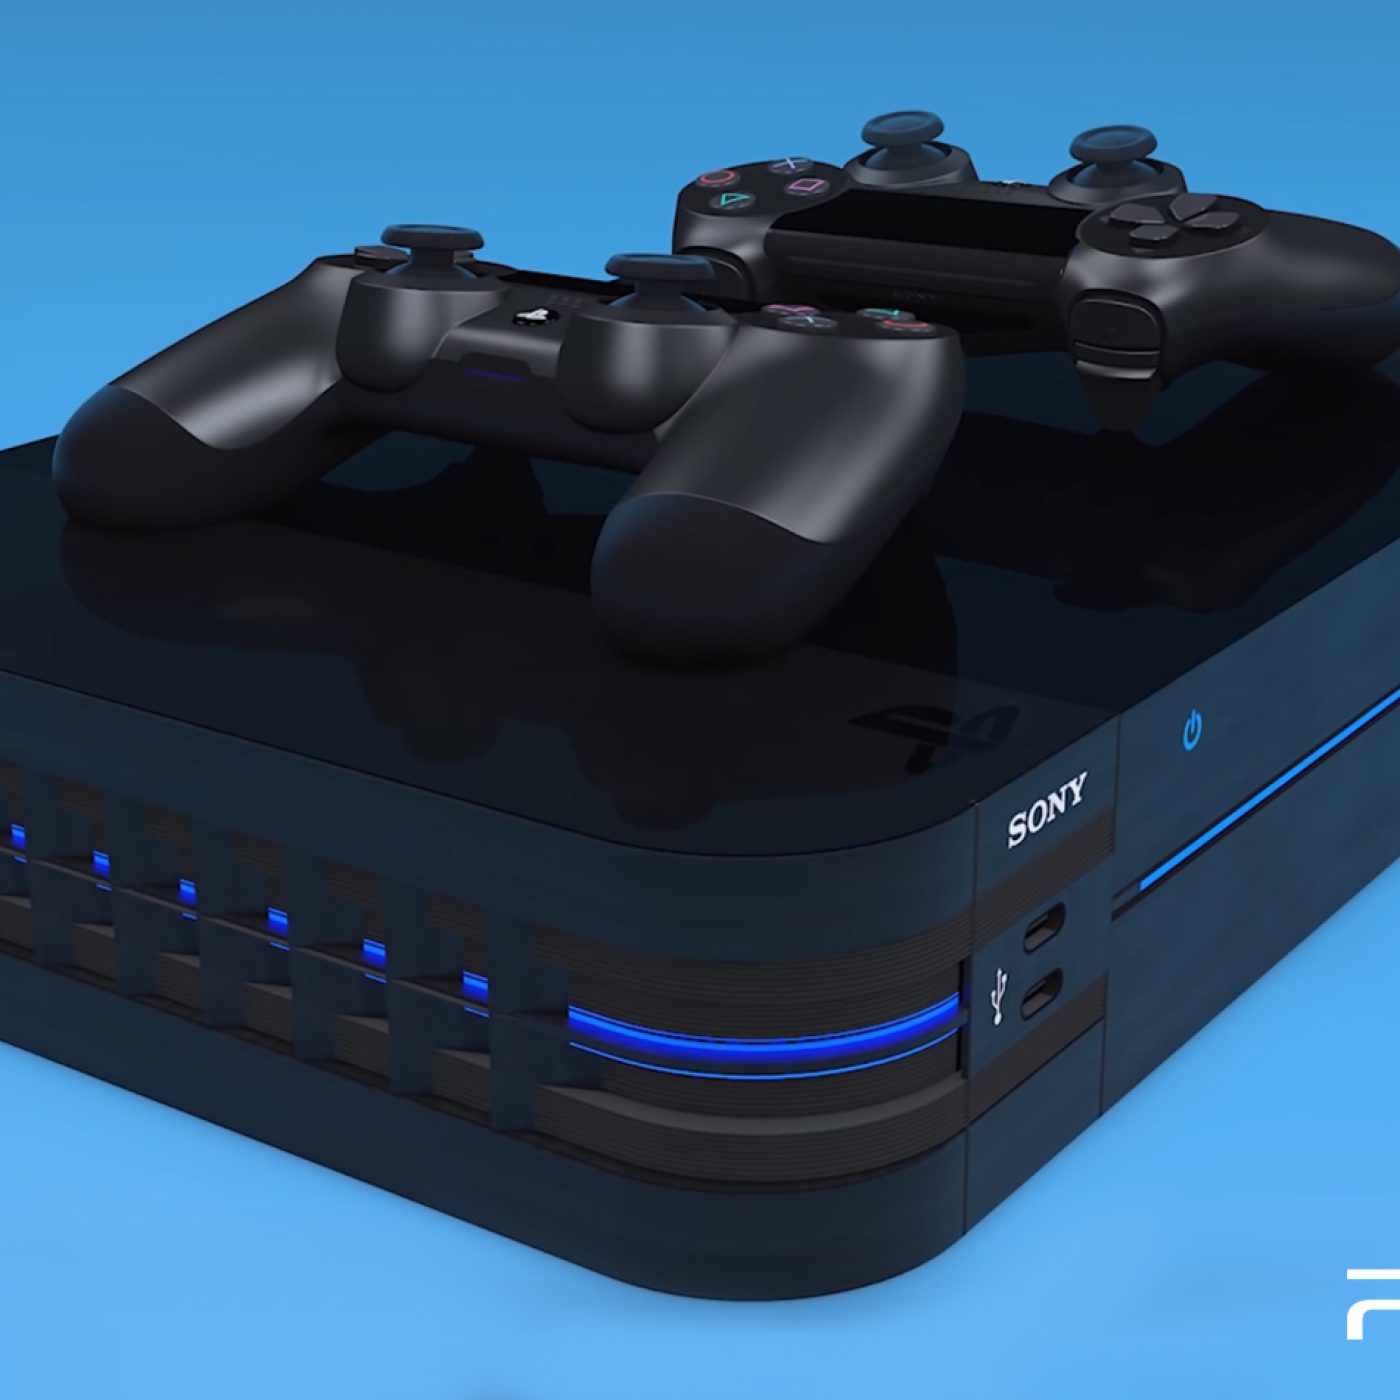 Two different leaks just revealed Sony's PlayStation 5 launch timing | BGR